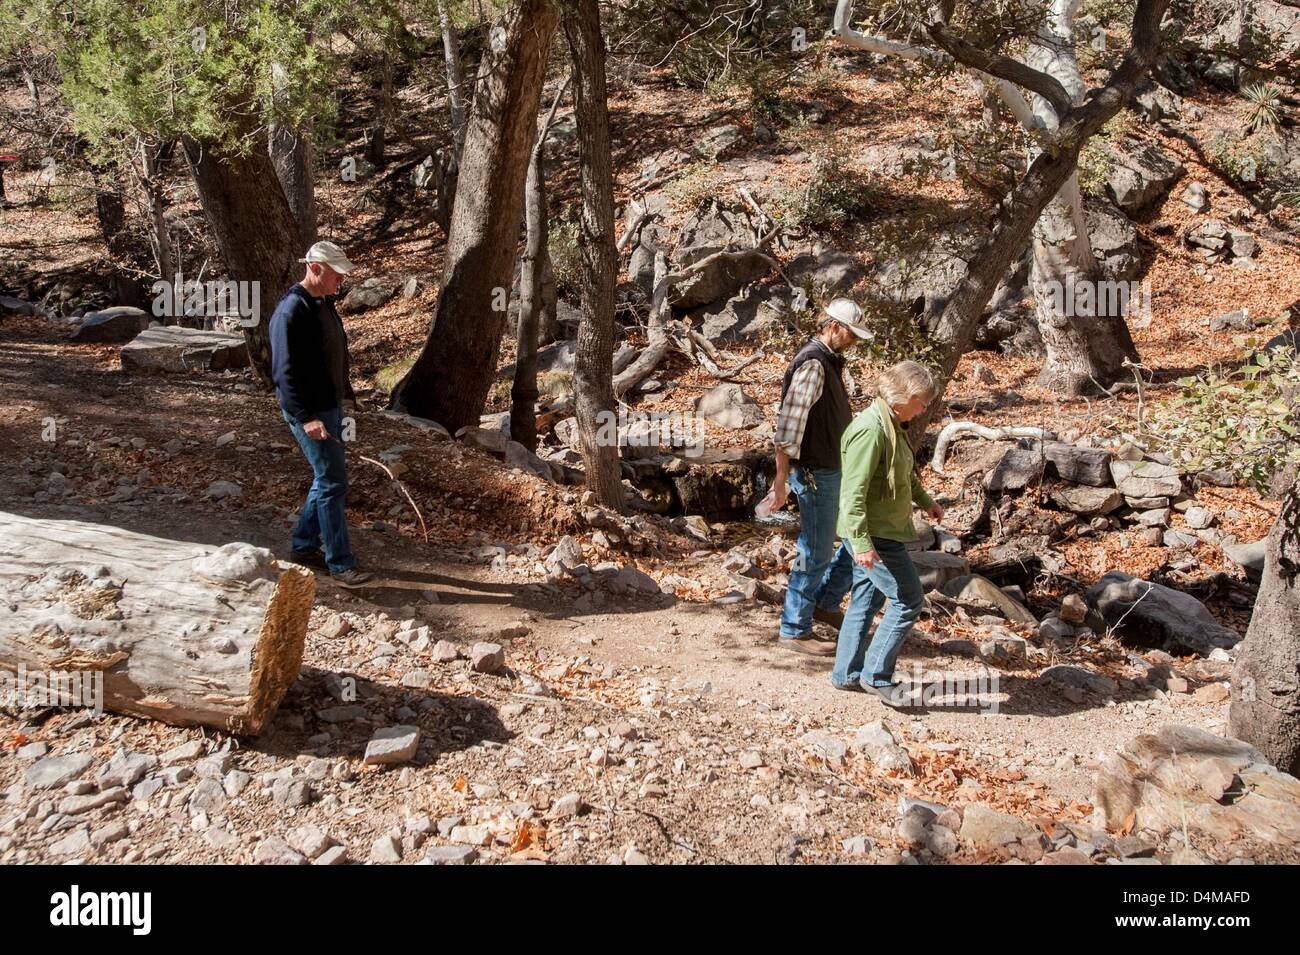 Feb. 7, 2013 - Tucson, Arizona, U.S - Visitors walk through Ramsey Canyon Preserve, a Nature Conservancy property near Hereford, Ariz., indicates the diversity of where visitors come from.  Much of the tourism in the Sierra Vista, Ariz. region is fueled by birding and ecotourism. (Credit Image: © Will Seberger/ZUMAPRESS.com) Stock Photo